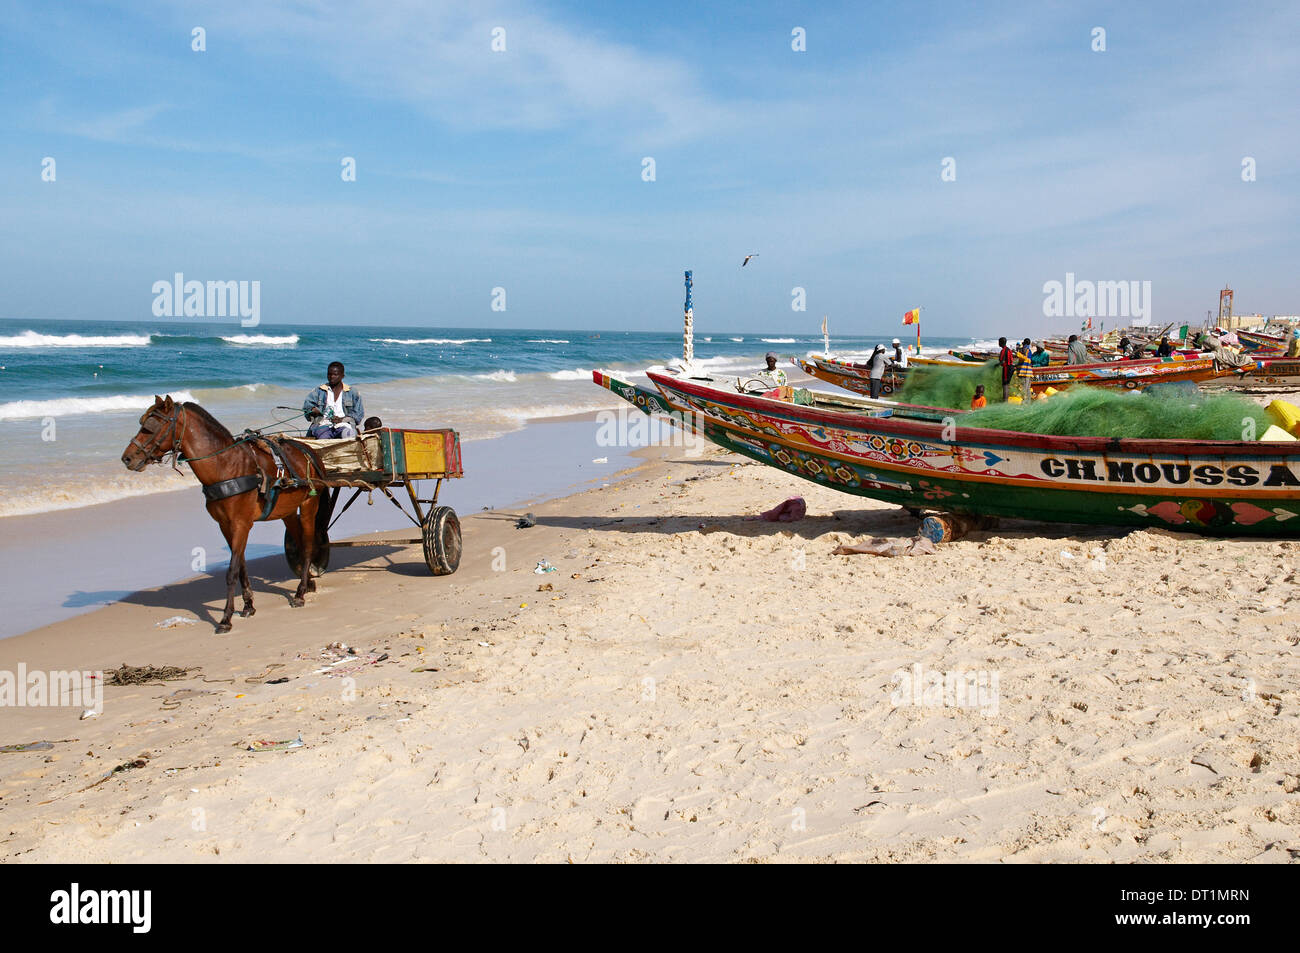 Fishing boats on the beach, city of Saint Louis, Senegal, West Africa, Africa Stock Photo